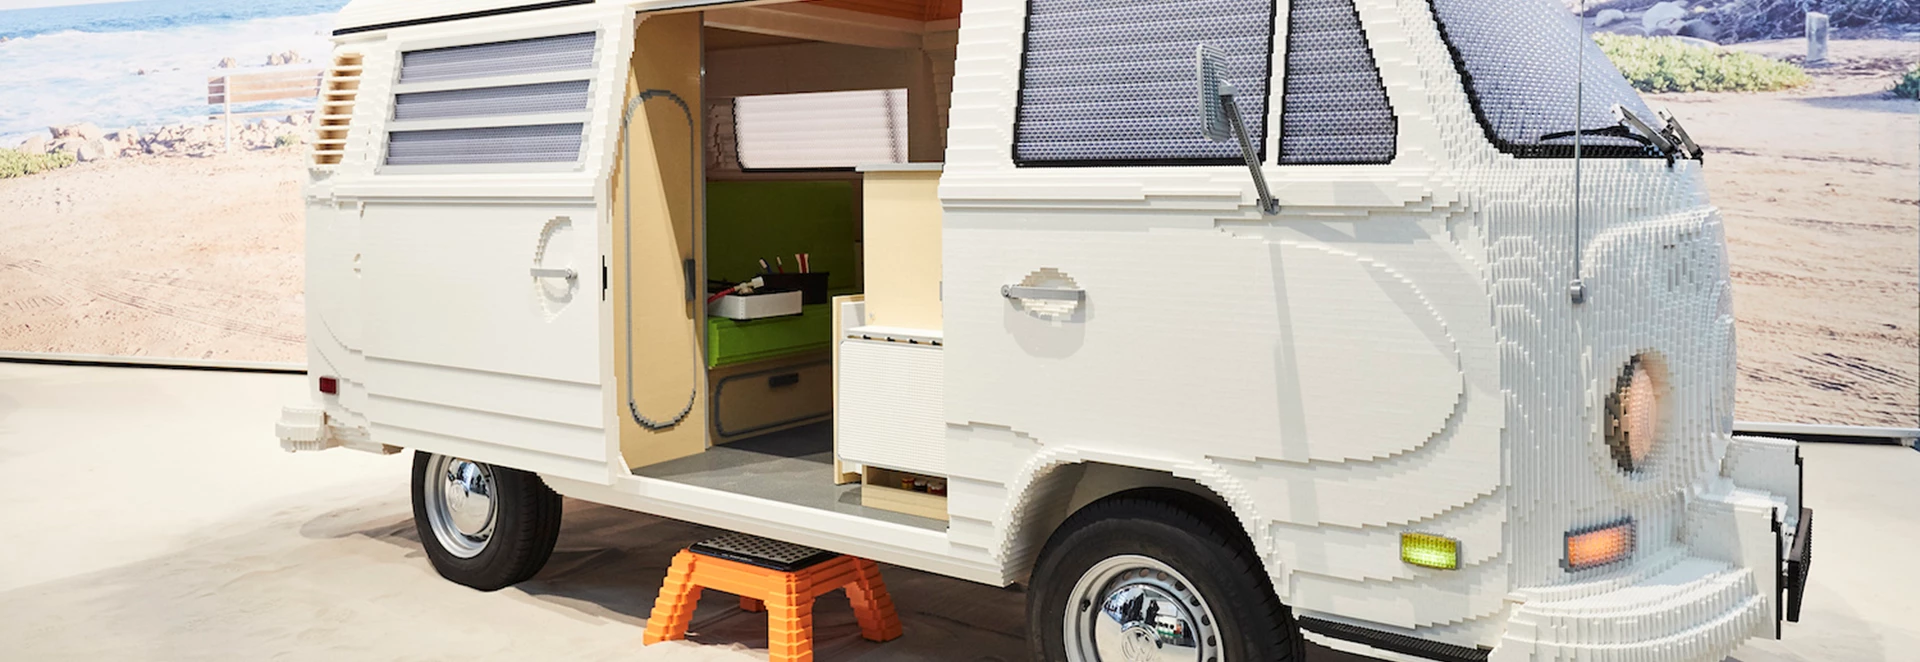 Volkswagen reveals full-size T2 camper made from LEGO